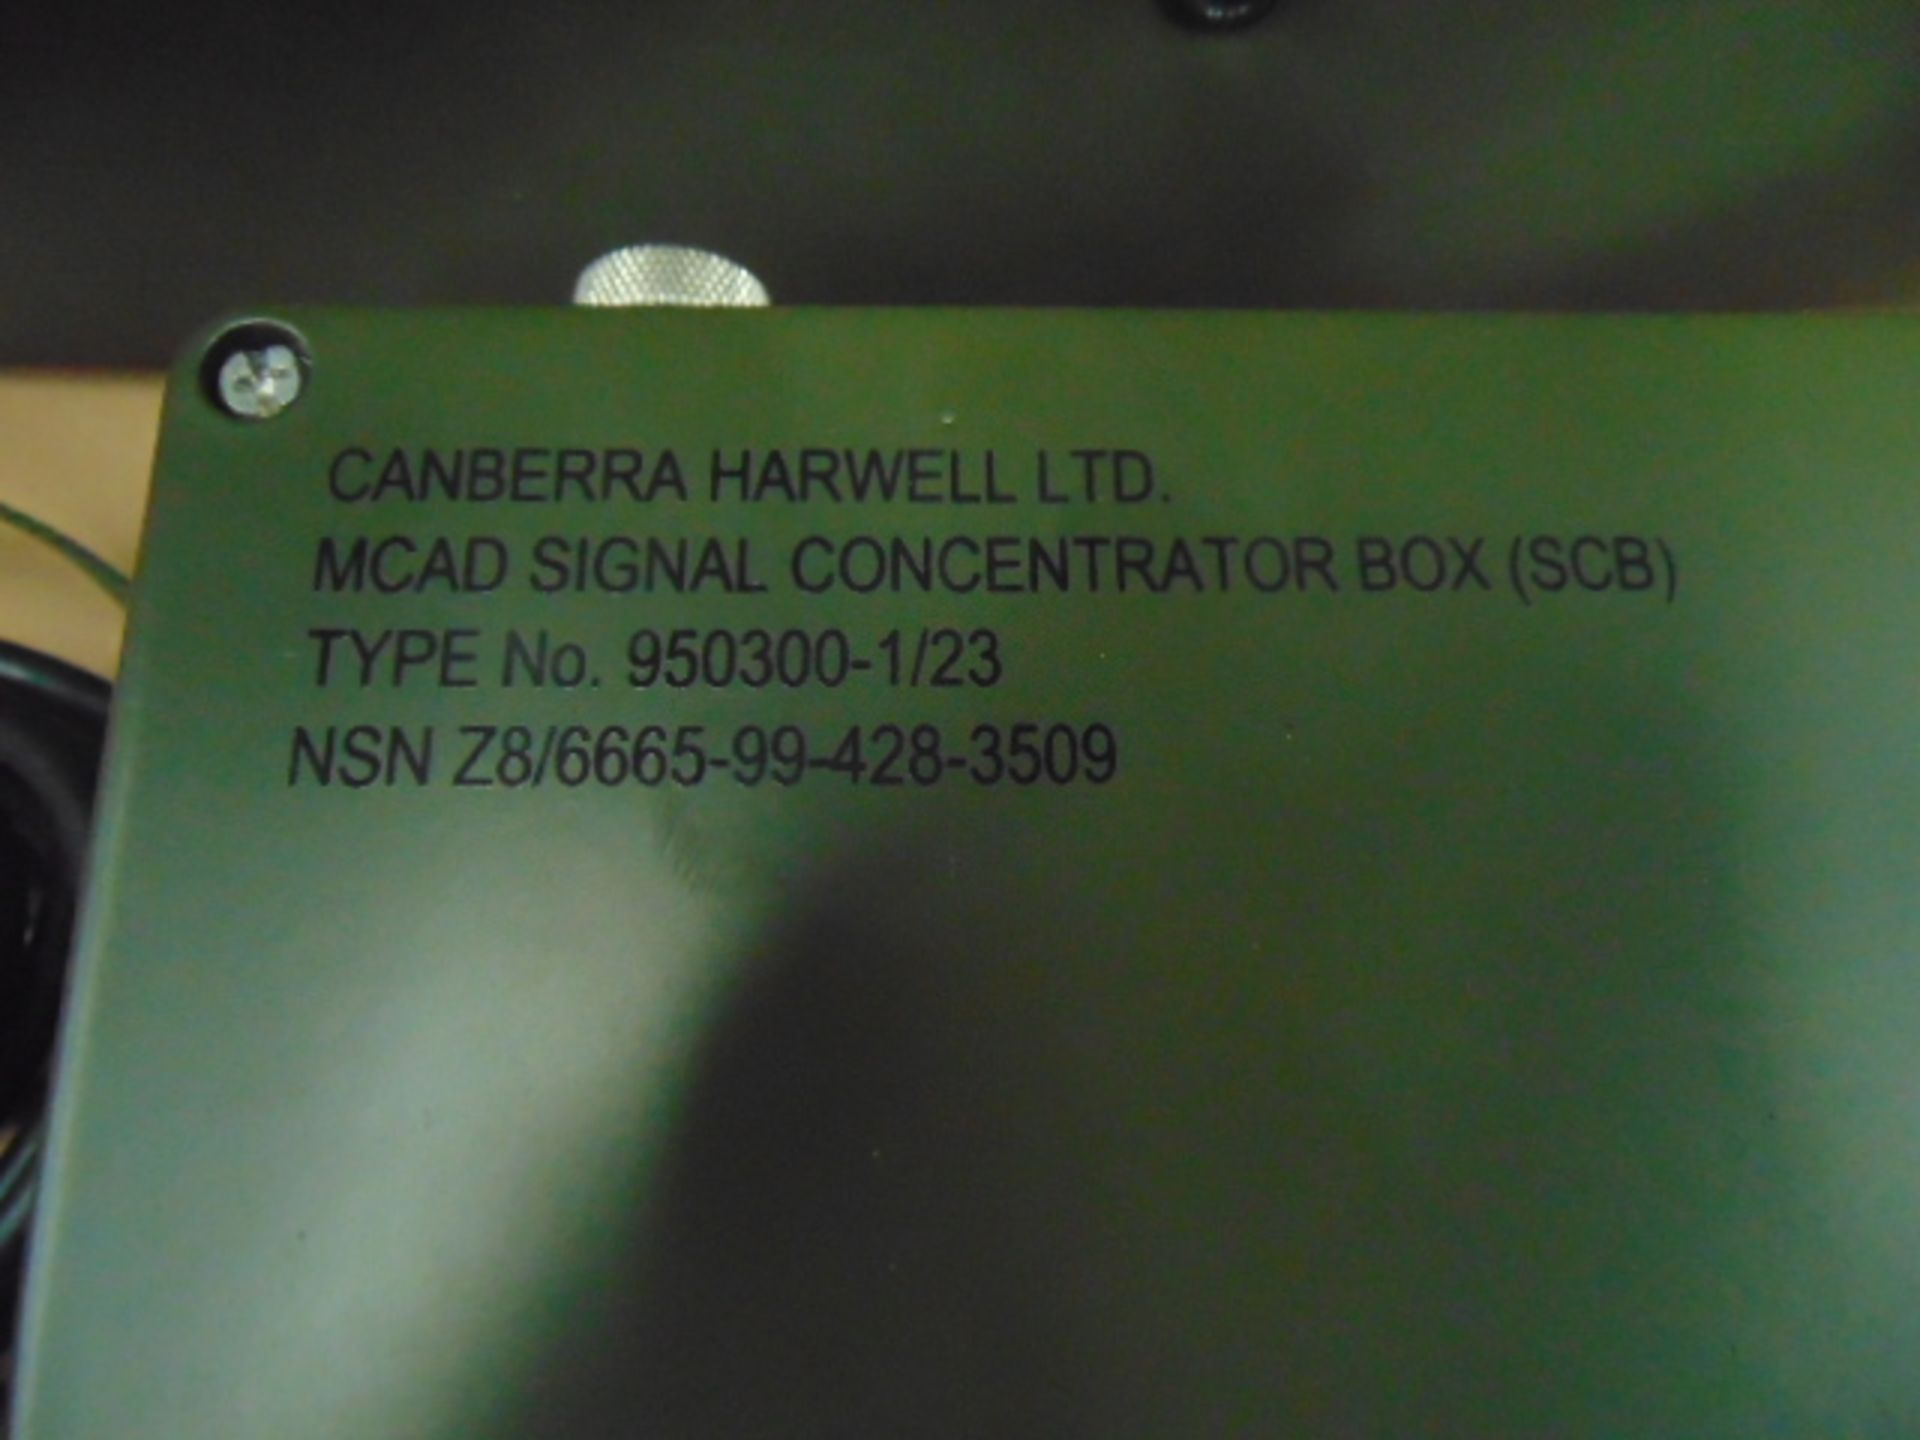 Canberra Harwell MCAD Signal Concentrator Box (SCB) - Image 4 of 8